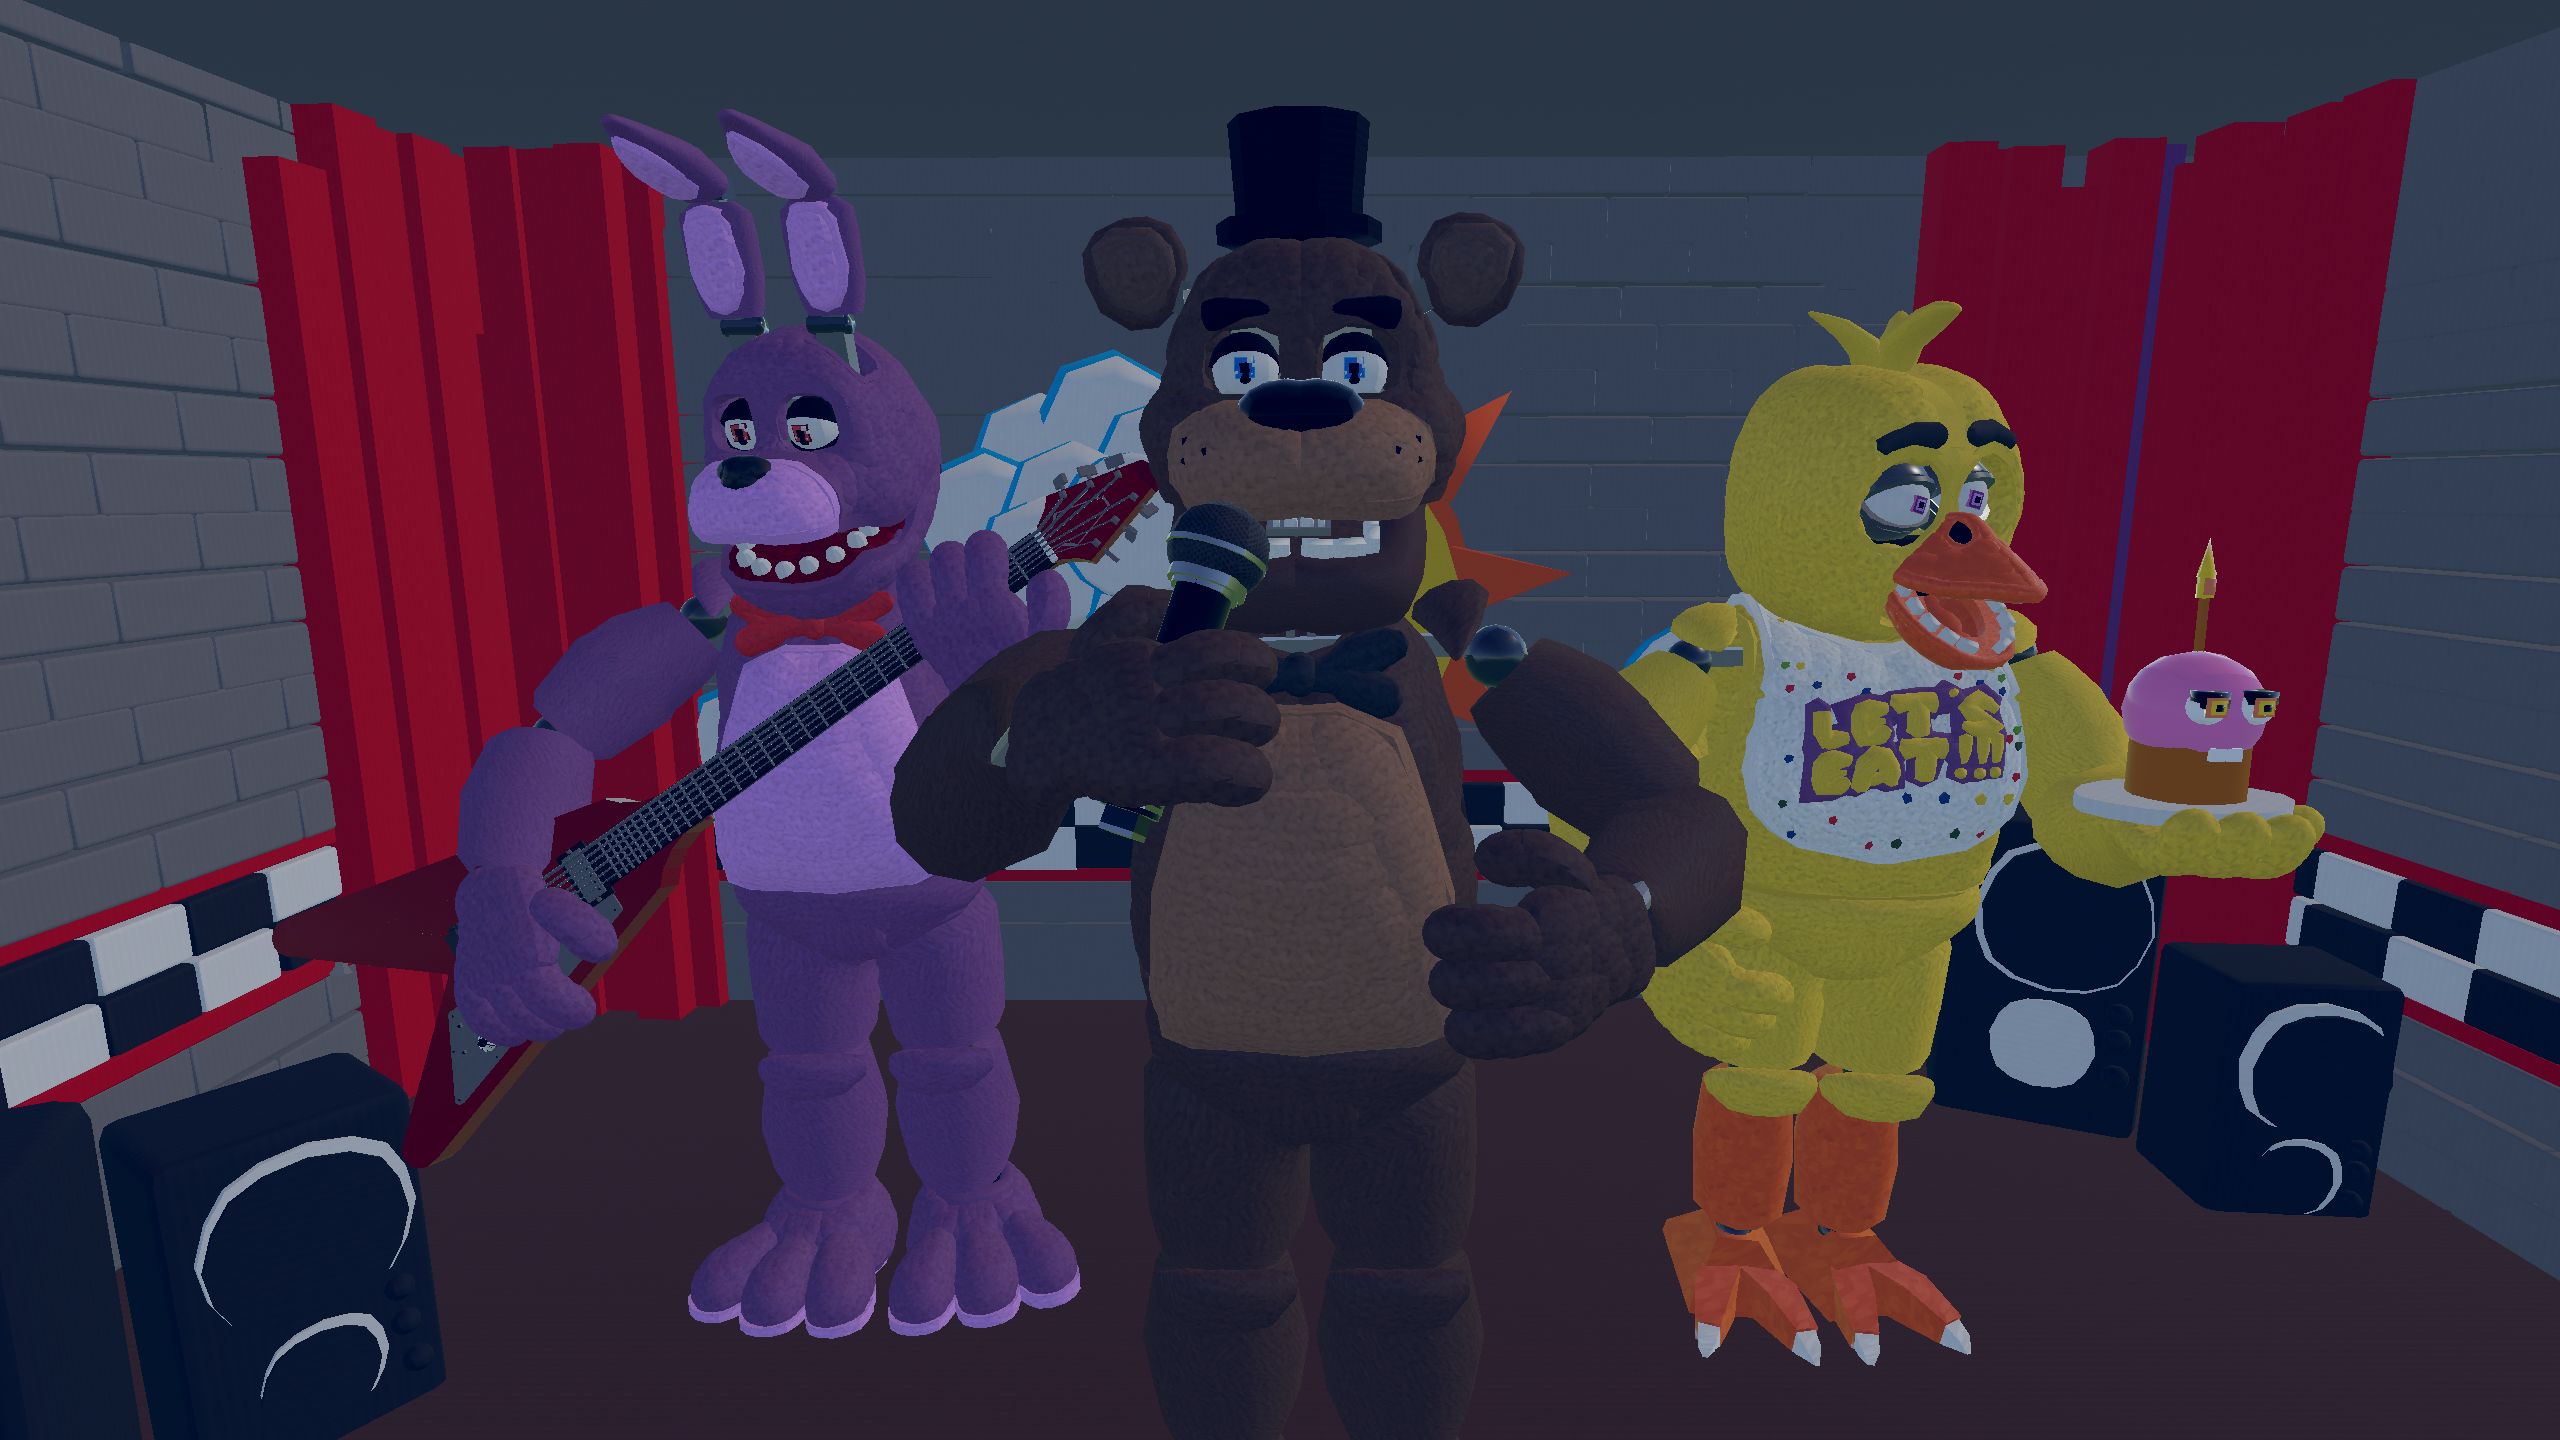 Finally uploaded my FNaF 1 recreation in GMod to the work